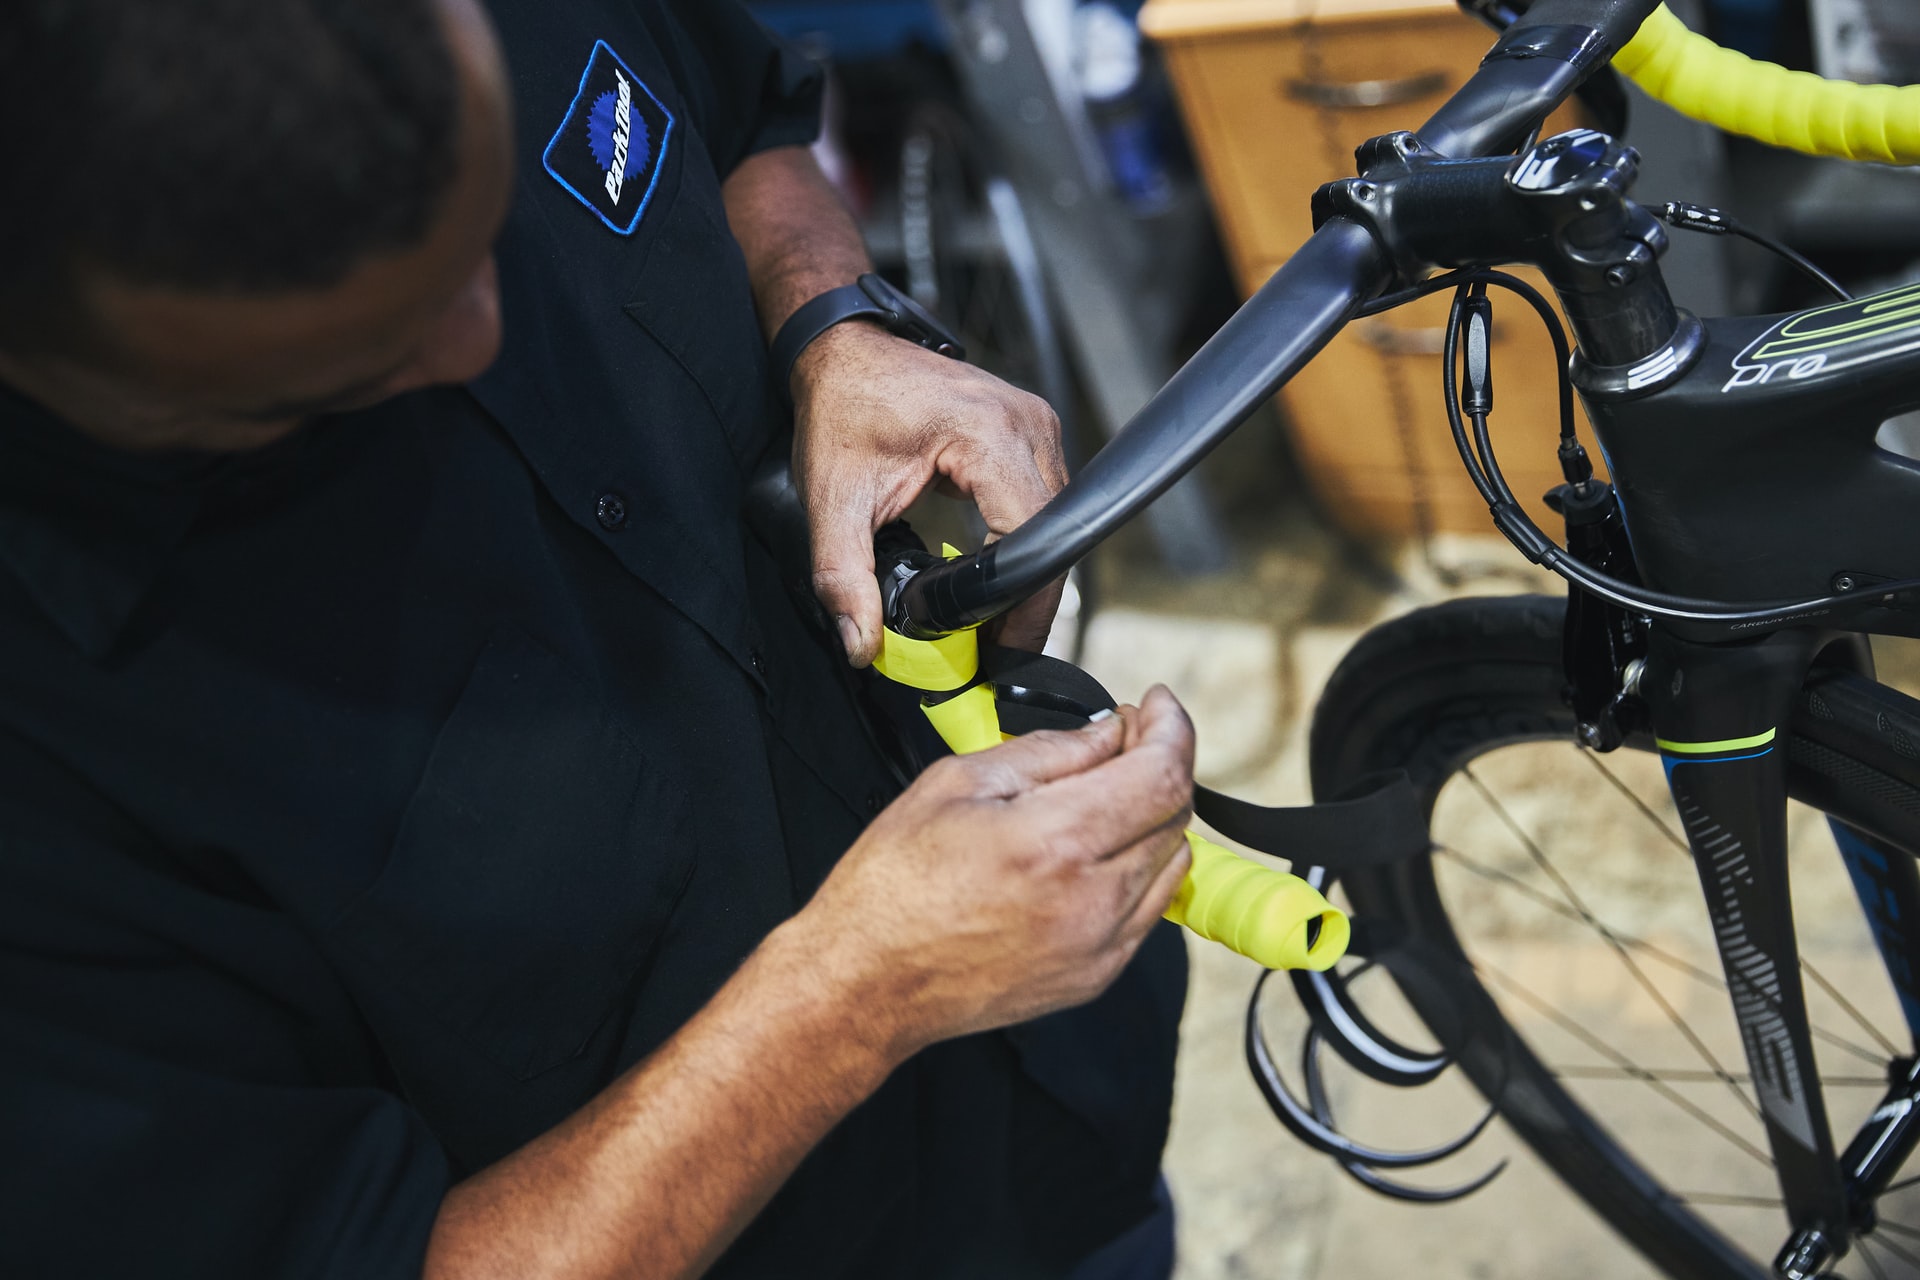 How Much Will Your Bike Tune-Up Cost You?